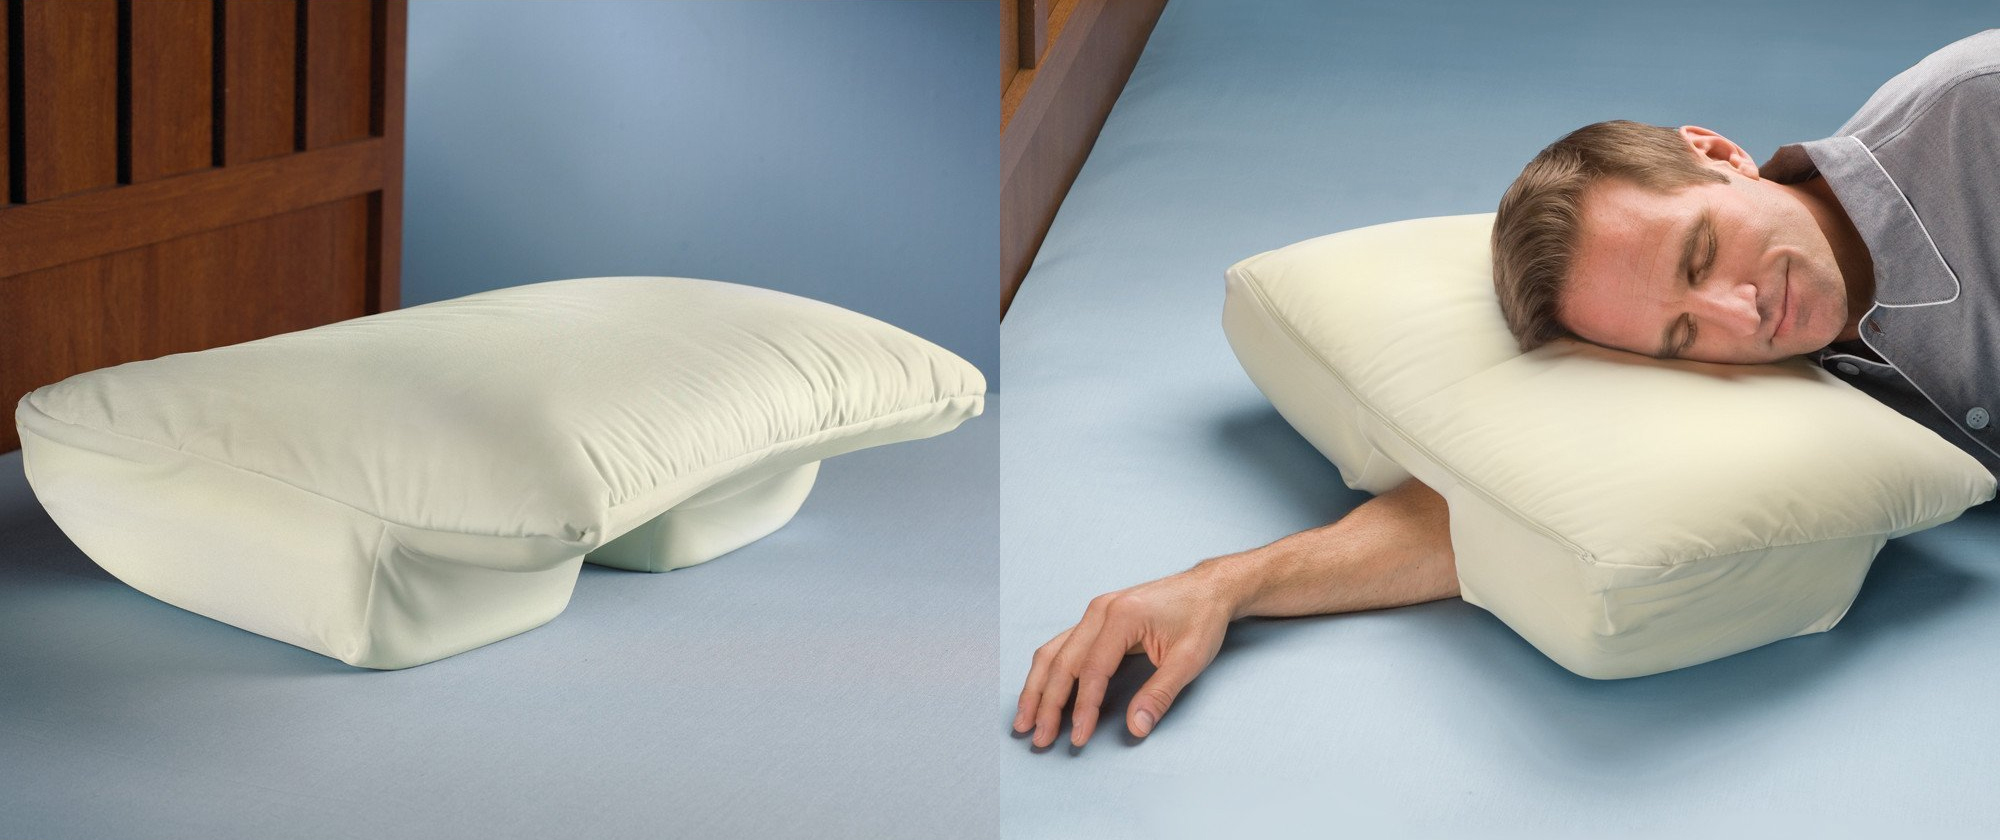 Side Sleepers pillow arm space funny nap gadget